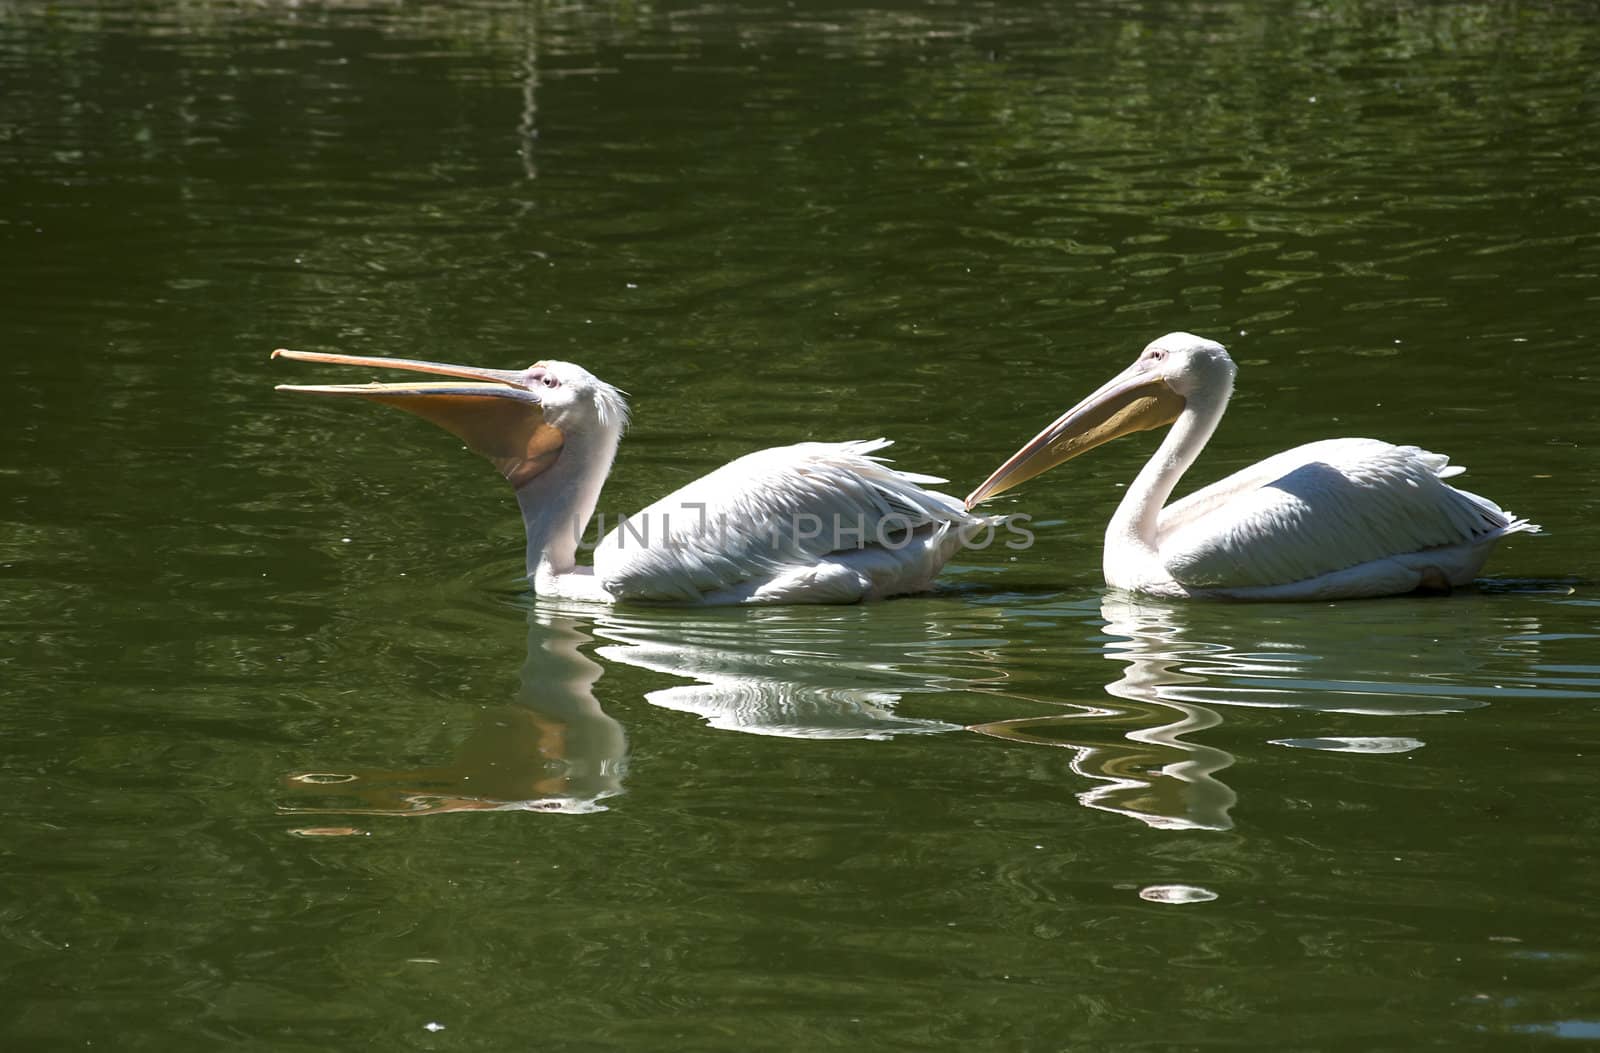 Two pelicans one after another in lake waters